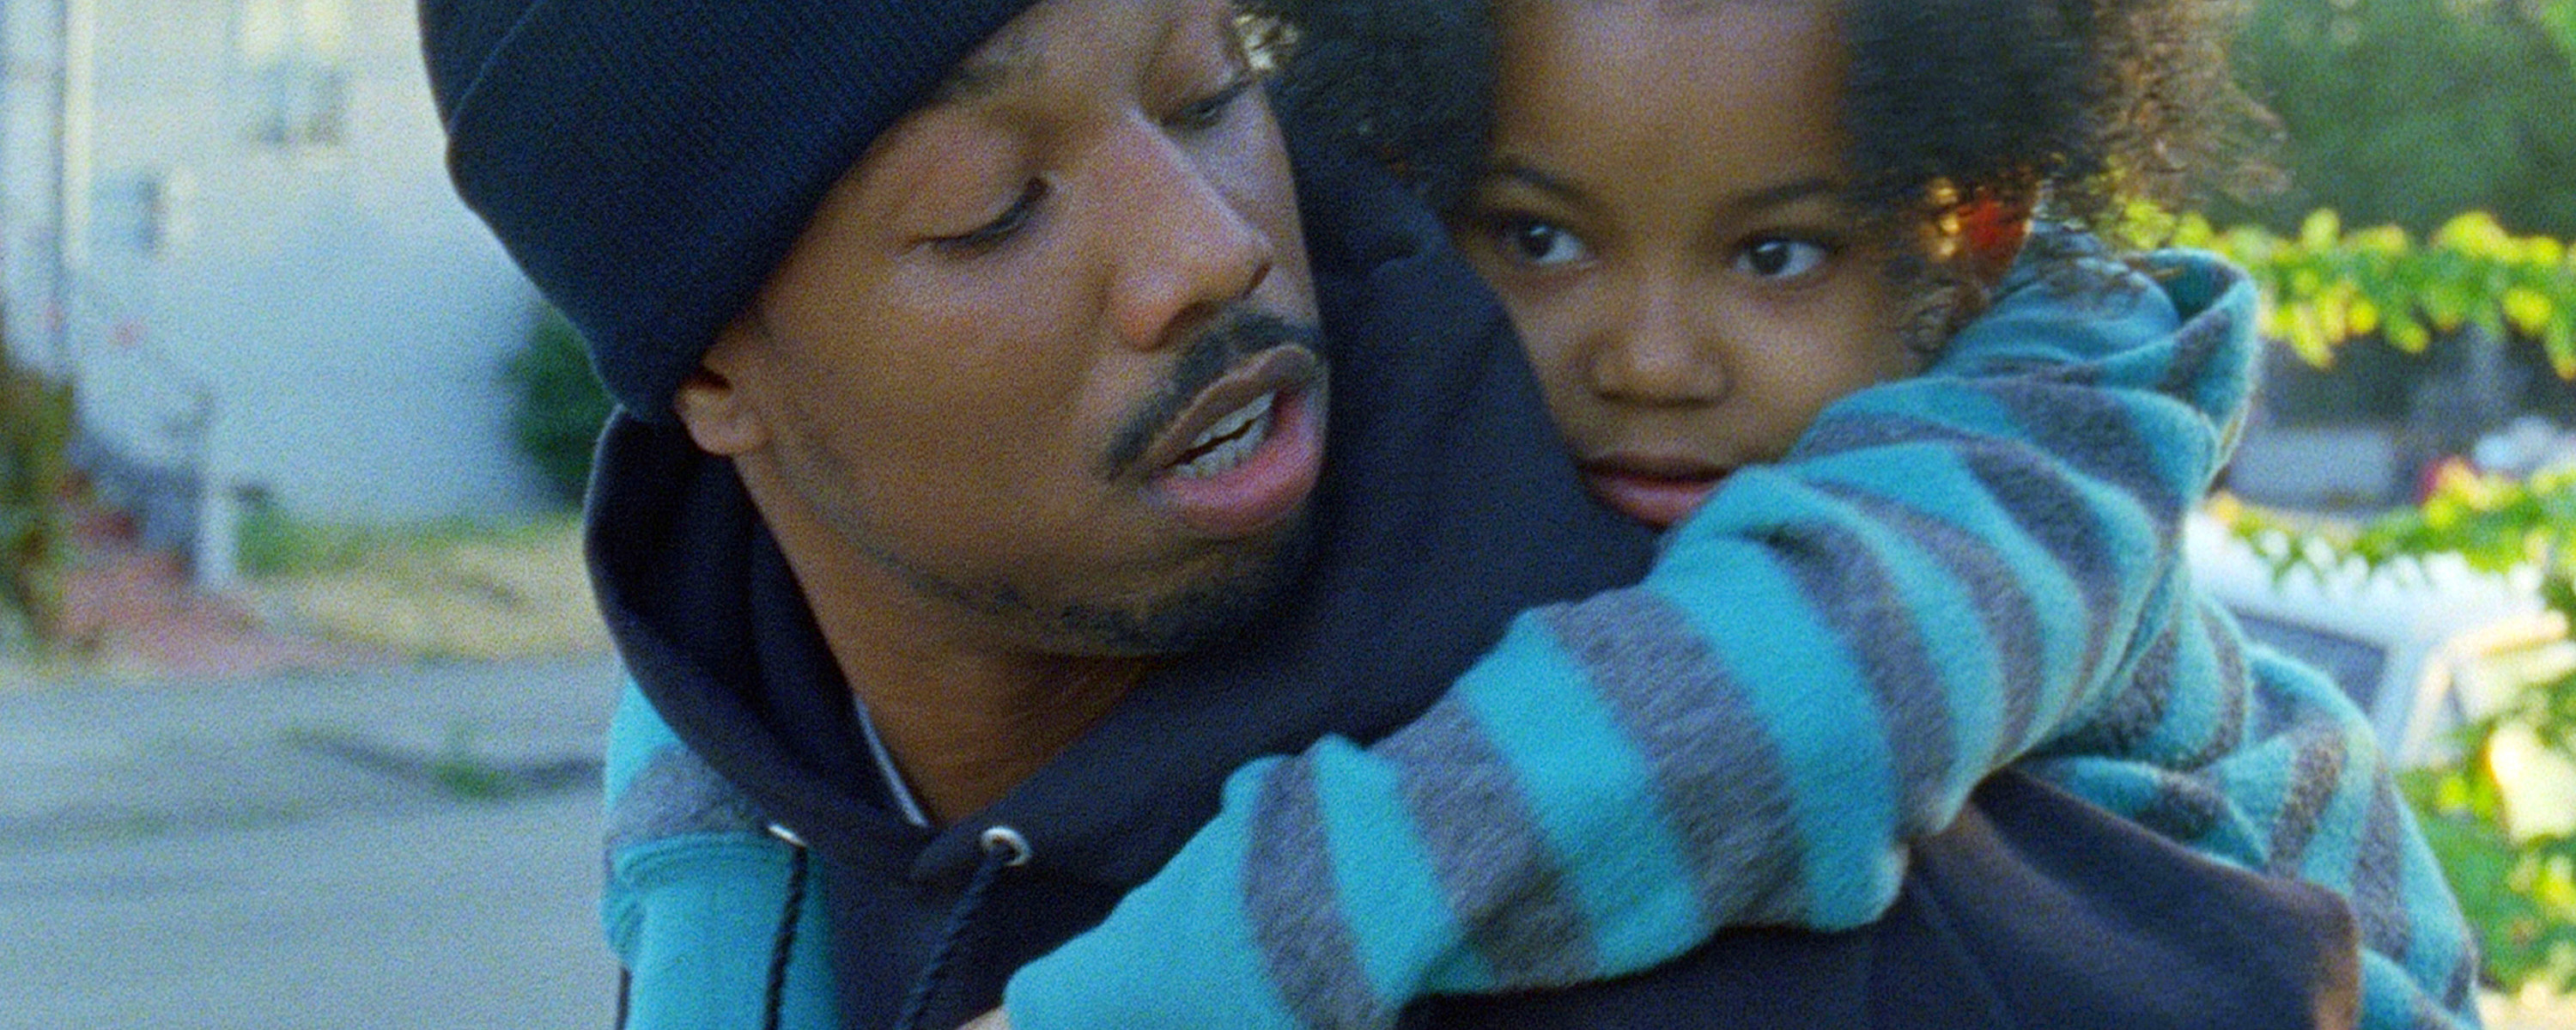 Michael B. Jordan in Fruitvale Station with a child hanging onto his shoulders and resting on his back